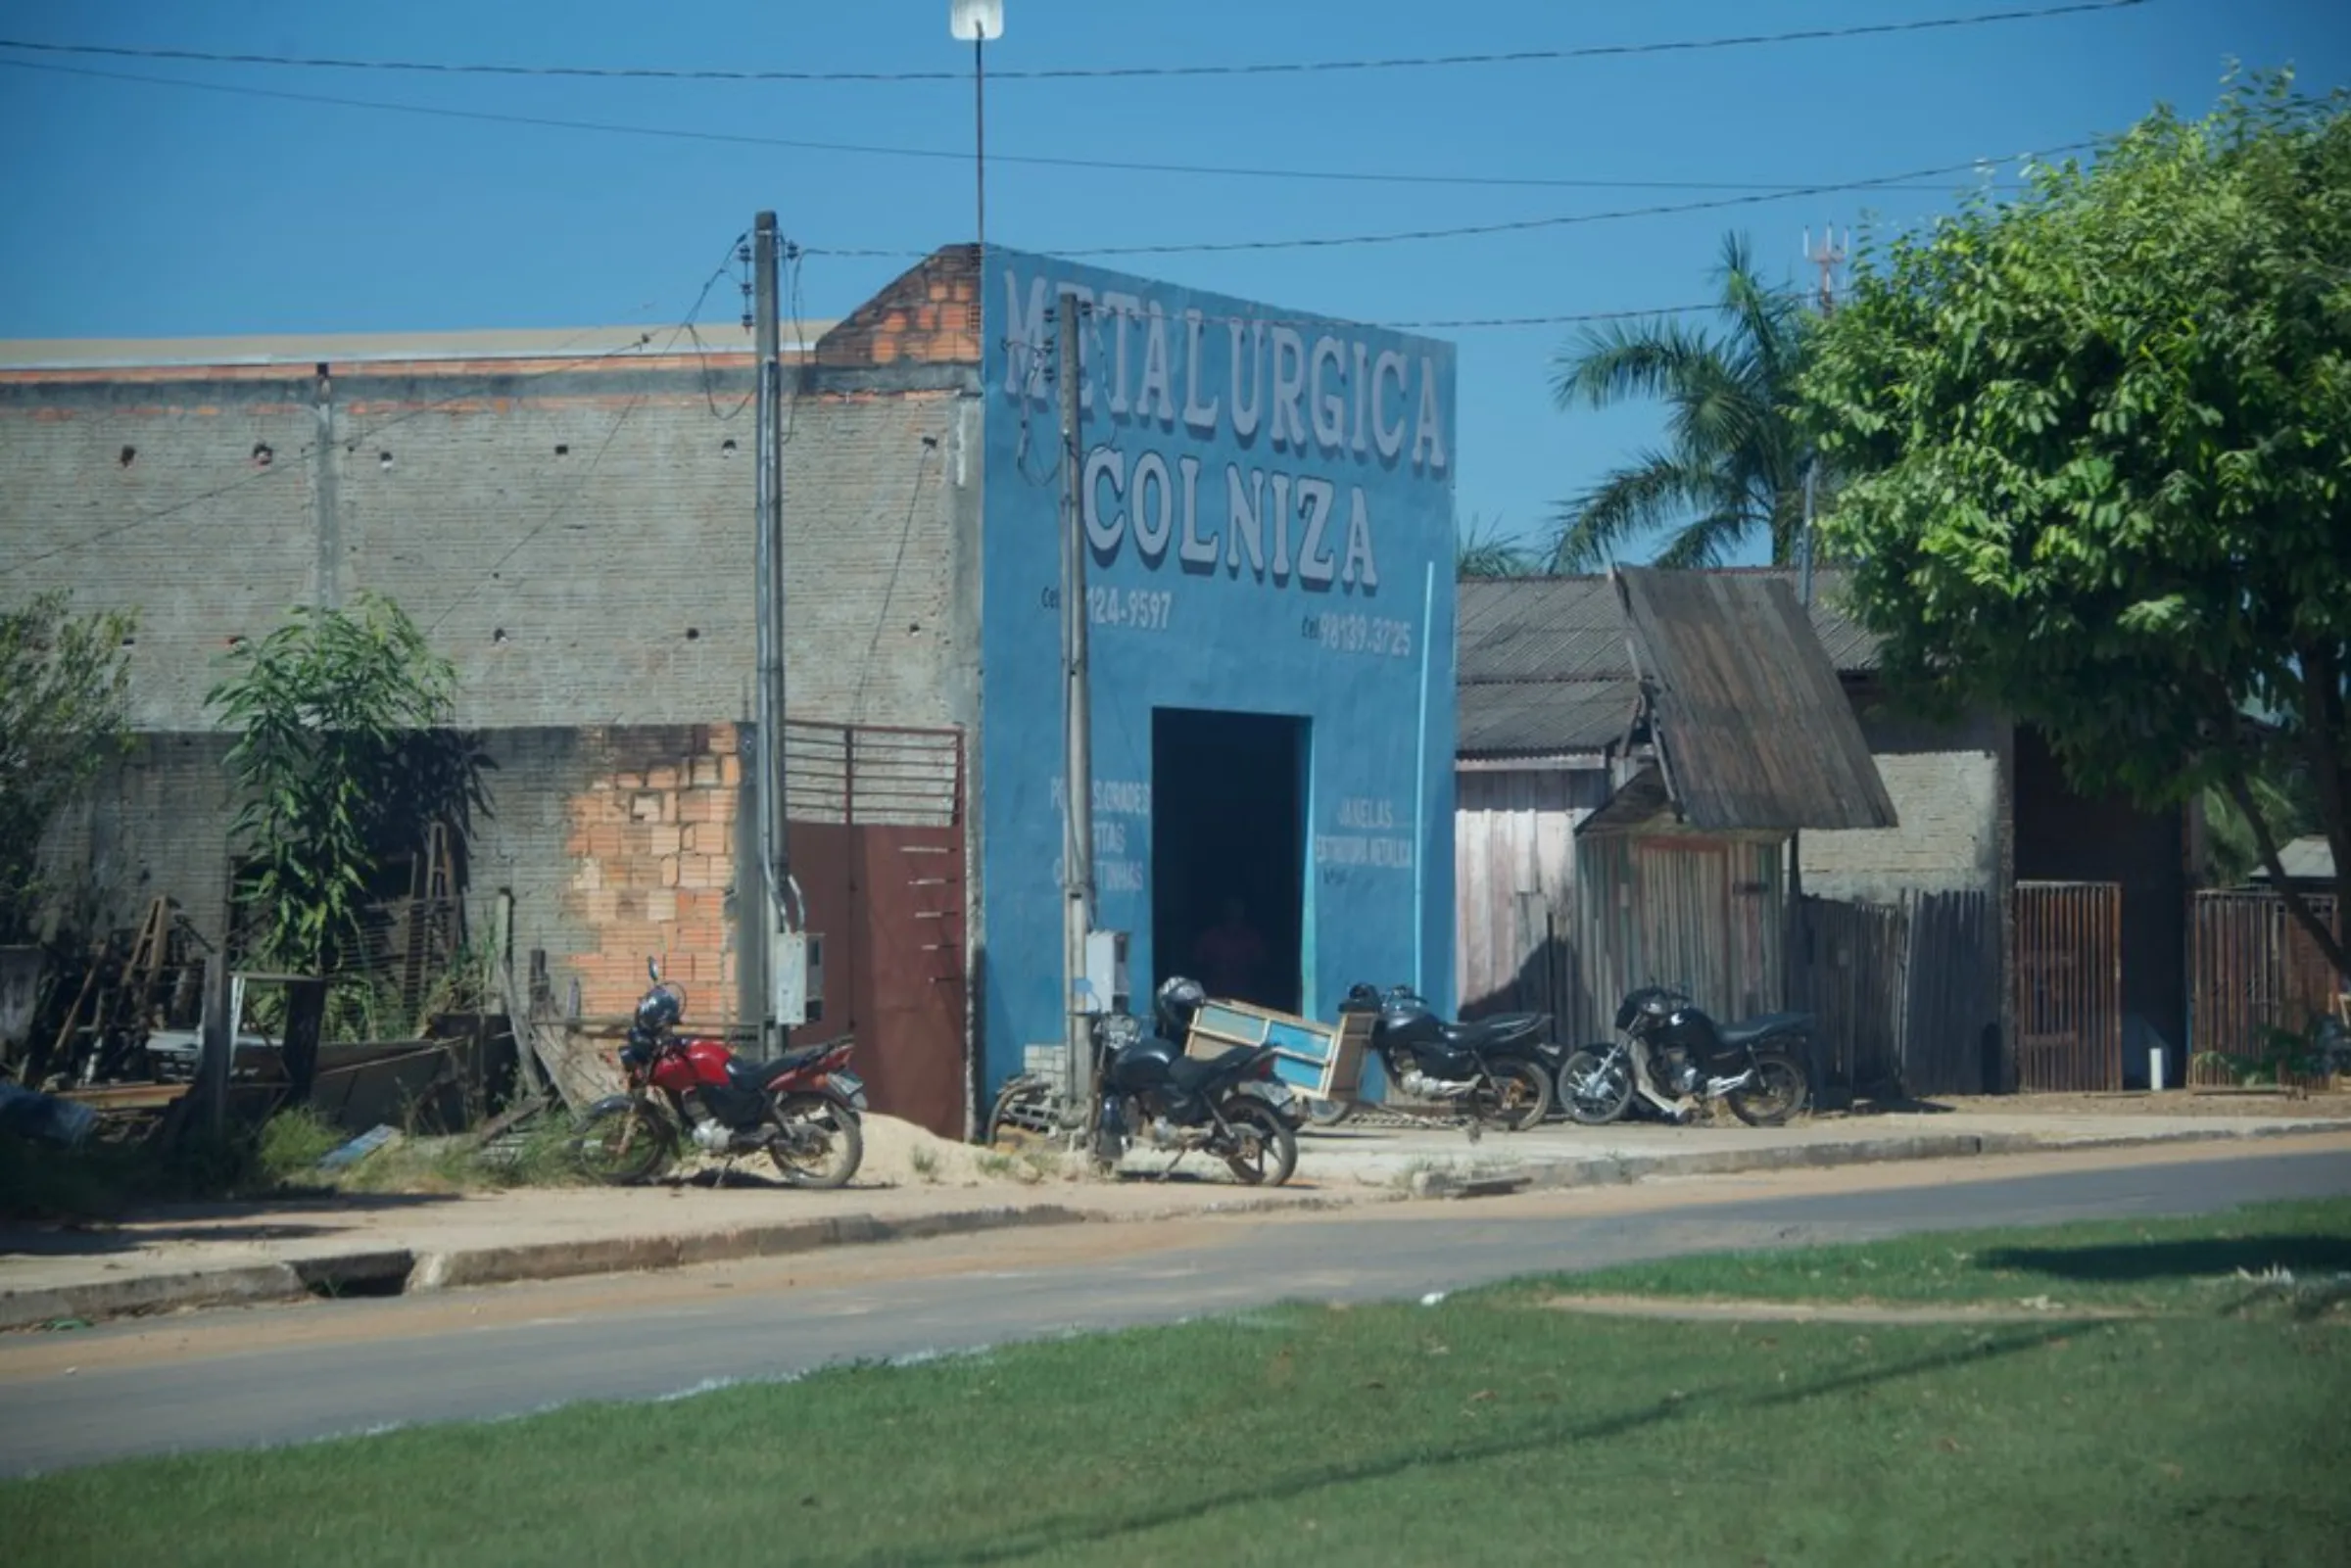 A local business in Colniza, a town in the state of Mato Grosso, Brazil May 31, 2022